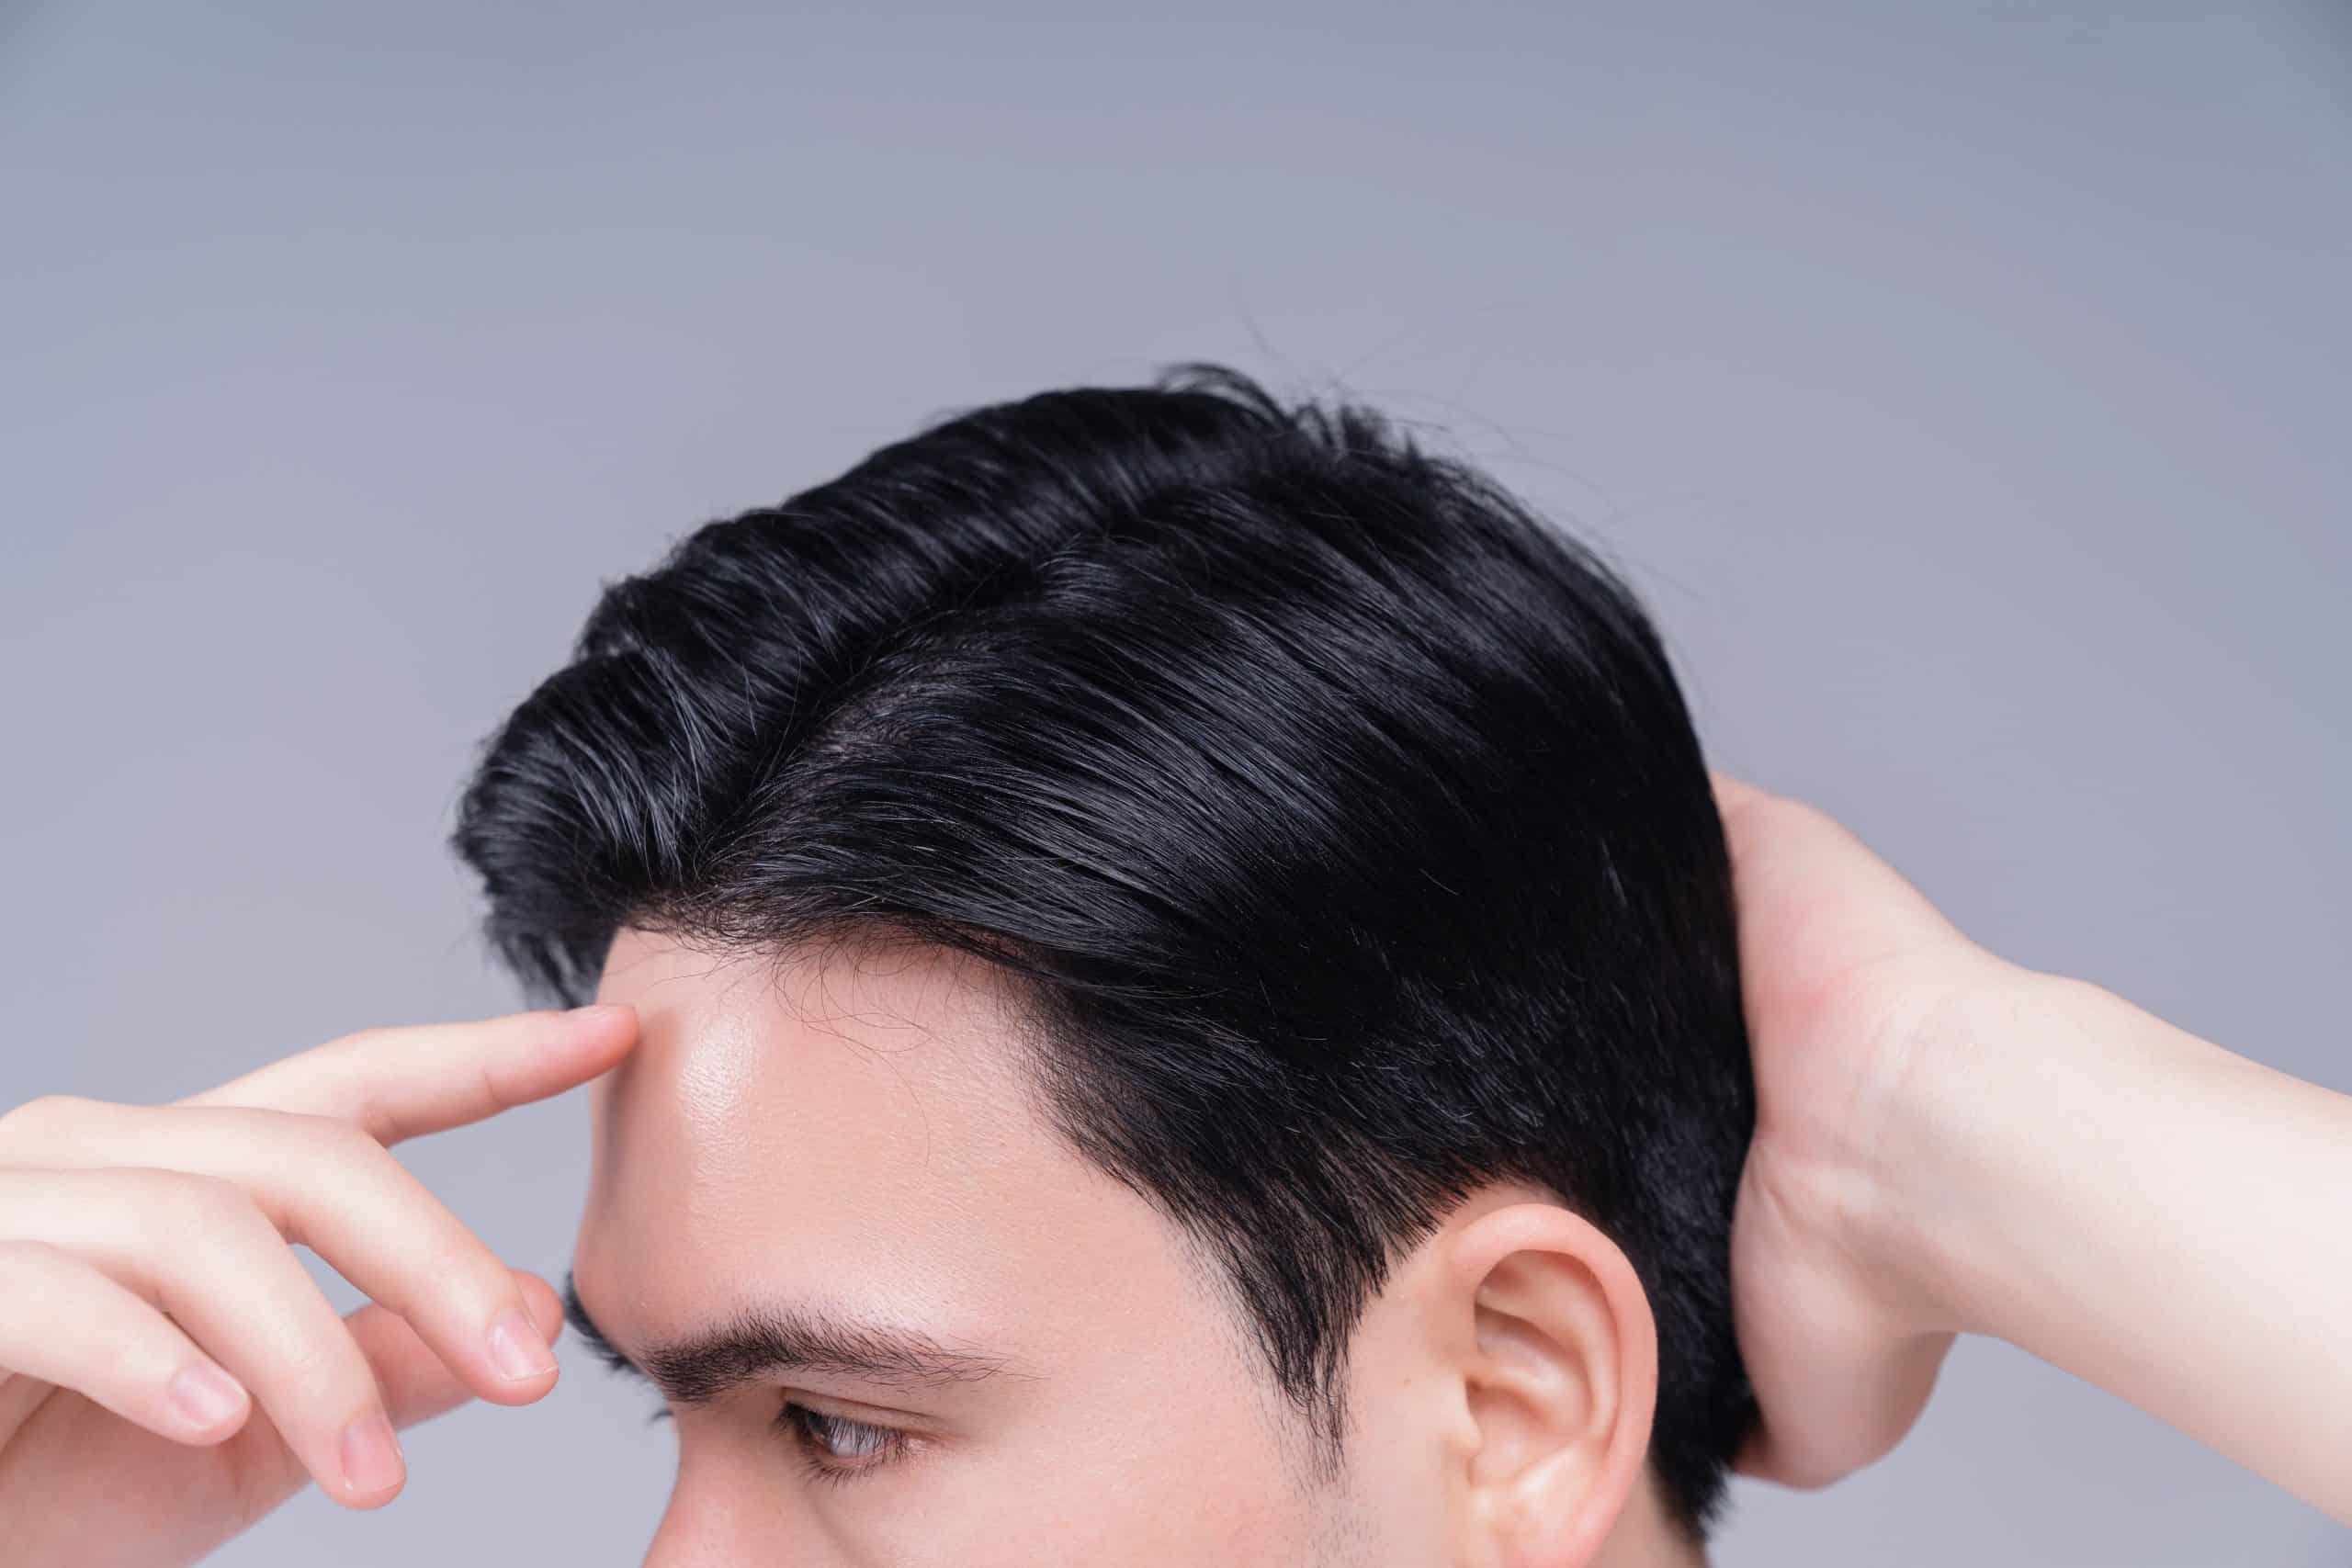 Are the results of a hair transplant permanent?